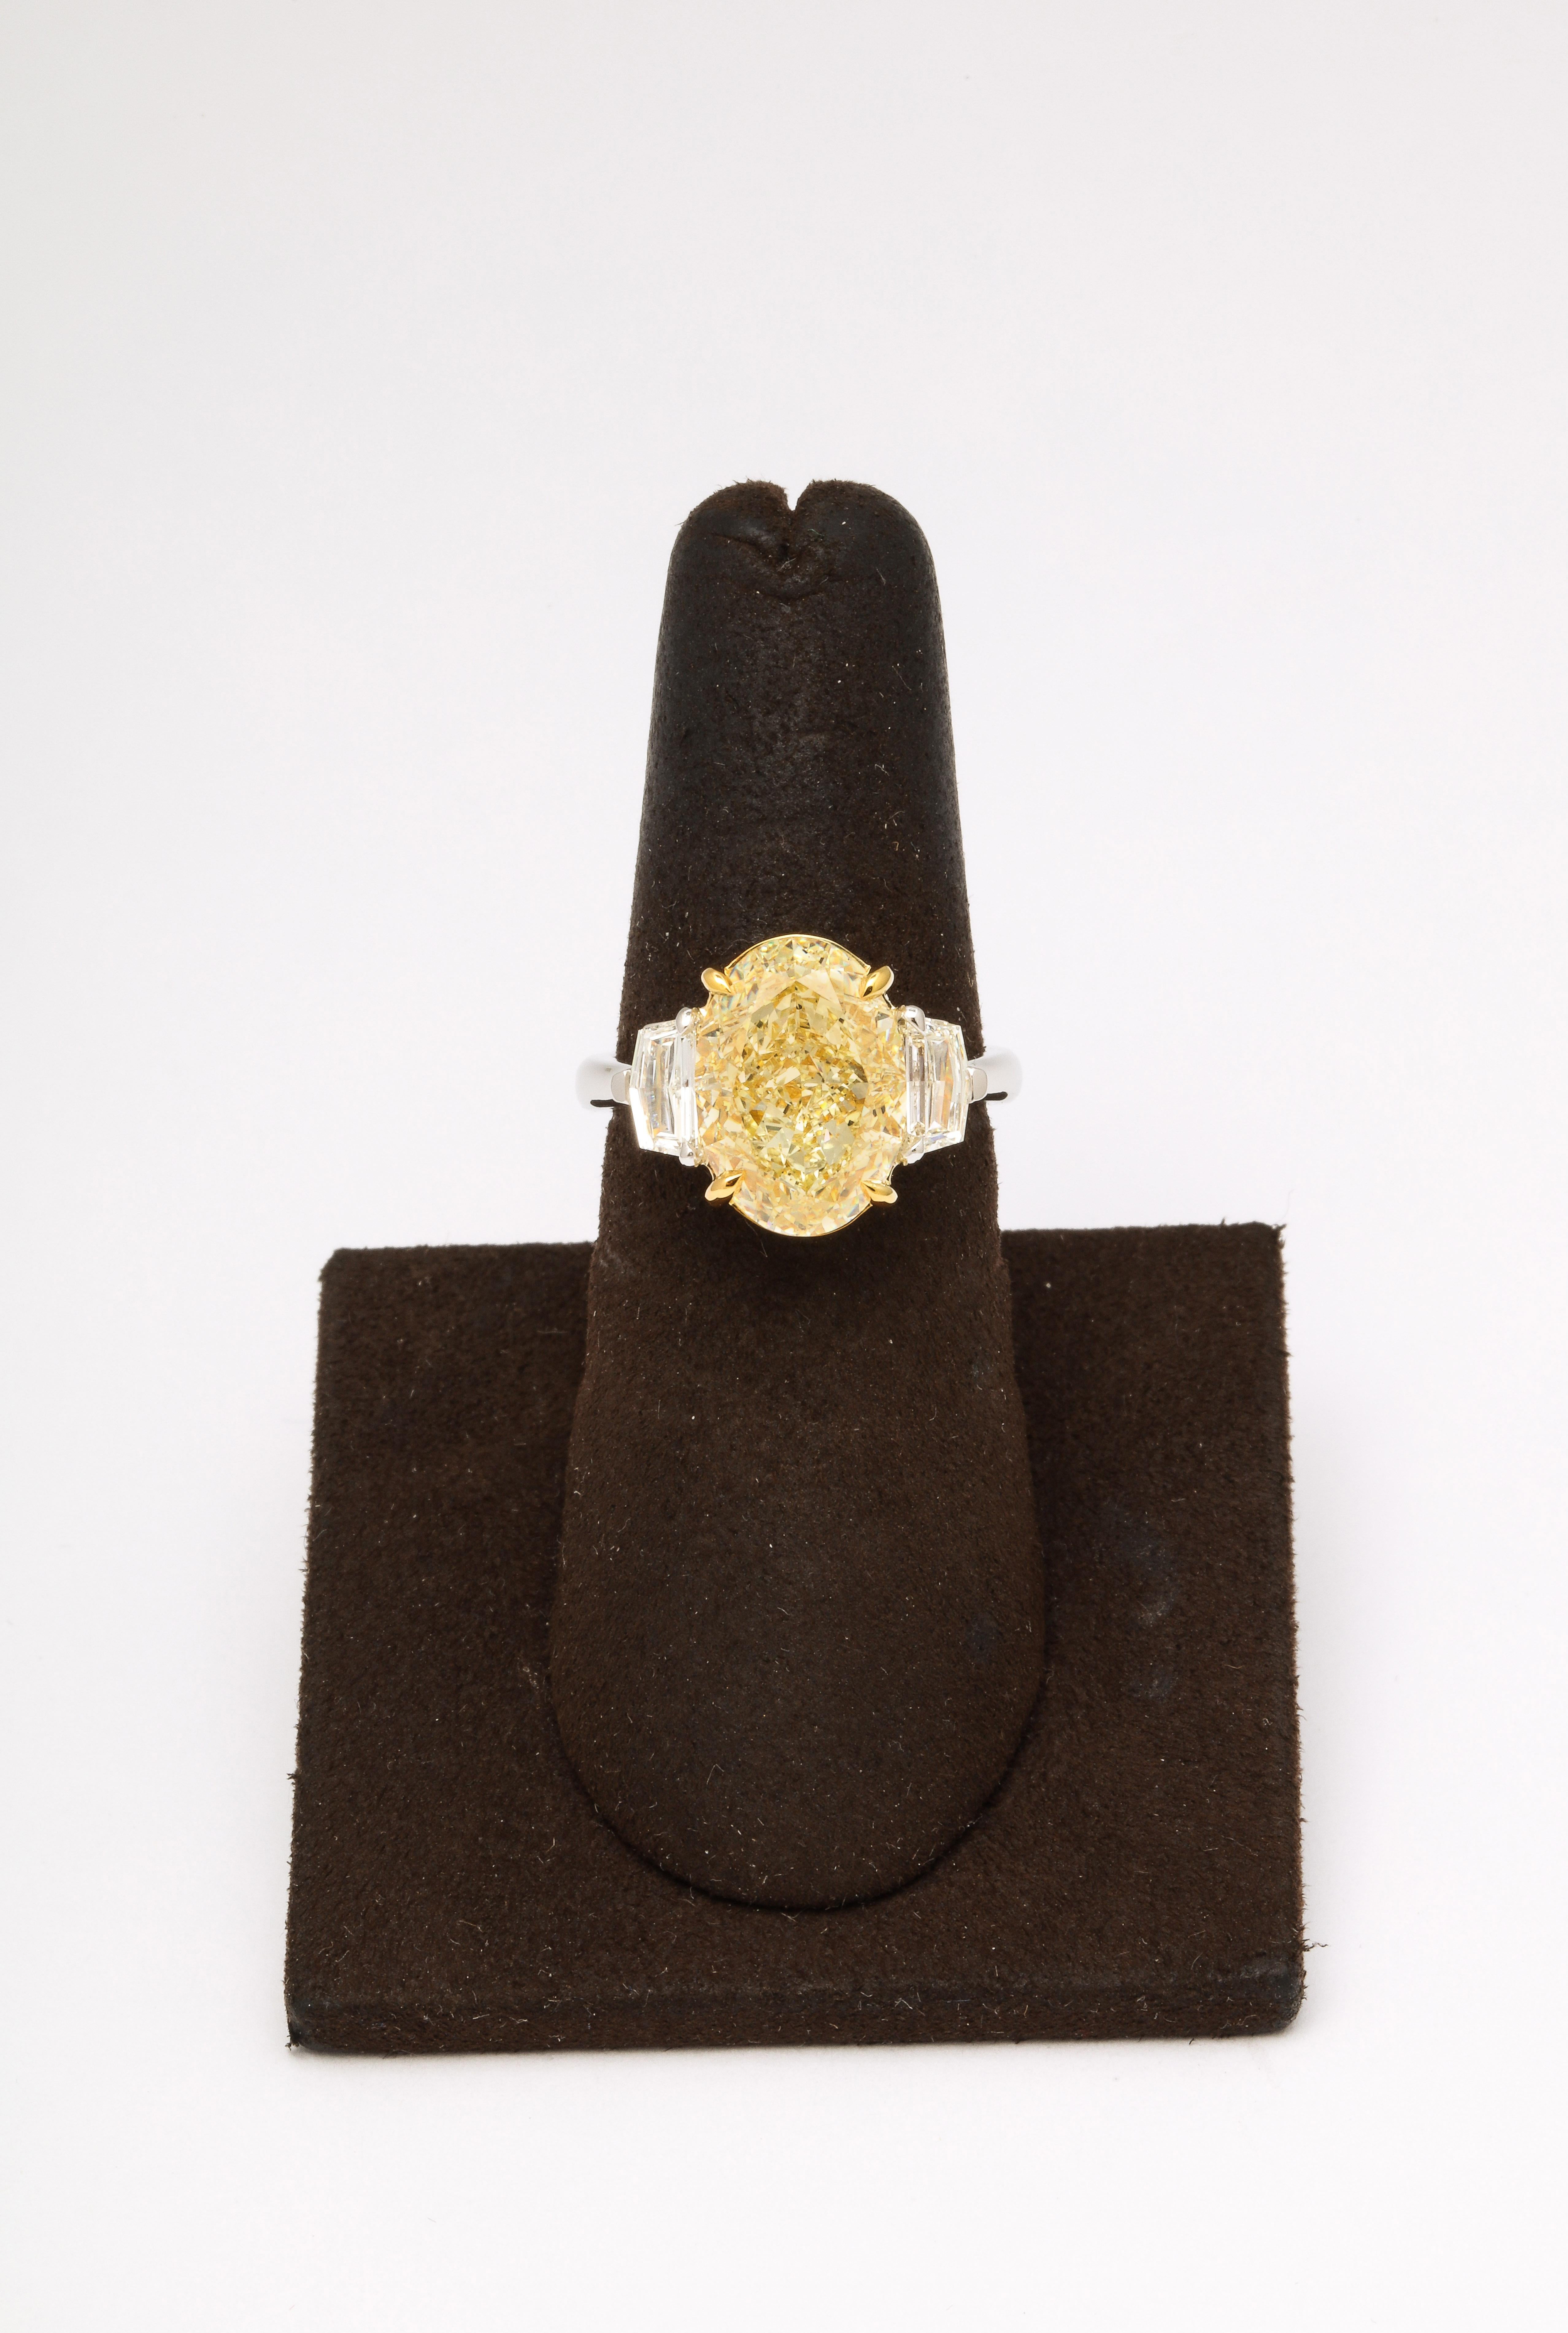 
6.03 carat GIA certified Fancy Light Yellow Oval center diamond, SI1. 

Ideal Oval shape - with strong deep yellow color - and lots of brilliance! 

.61 carats of epaulette white side diamonds. 

Custom made in 18k yellow gold and platinum.